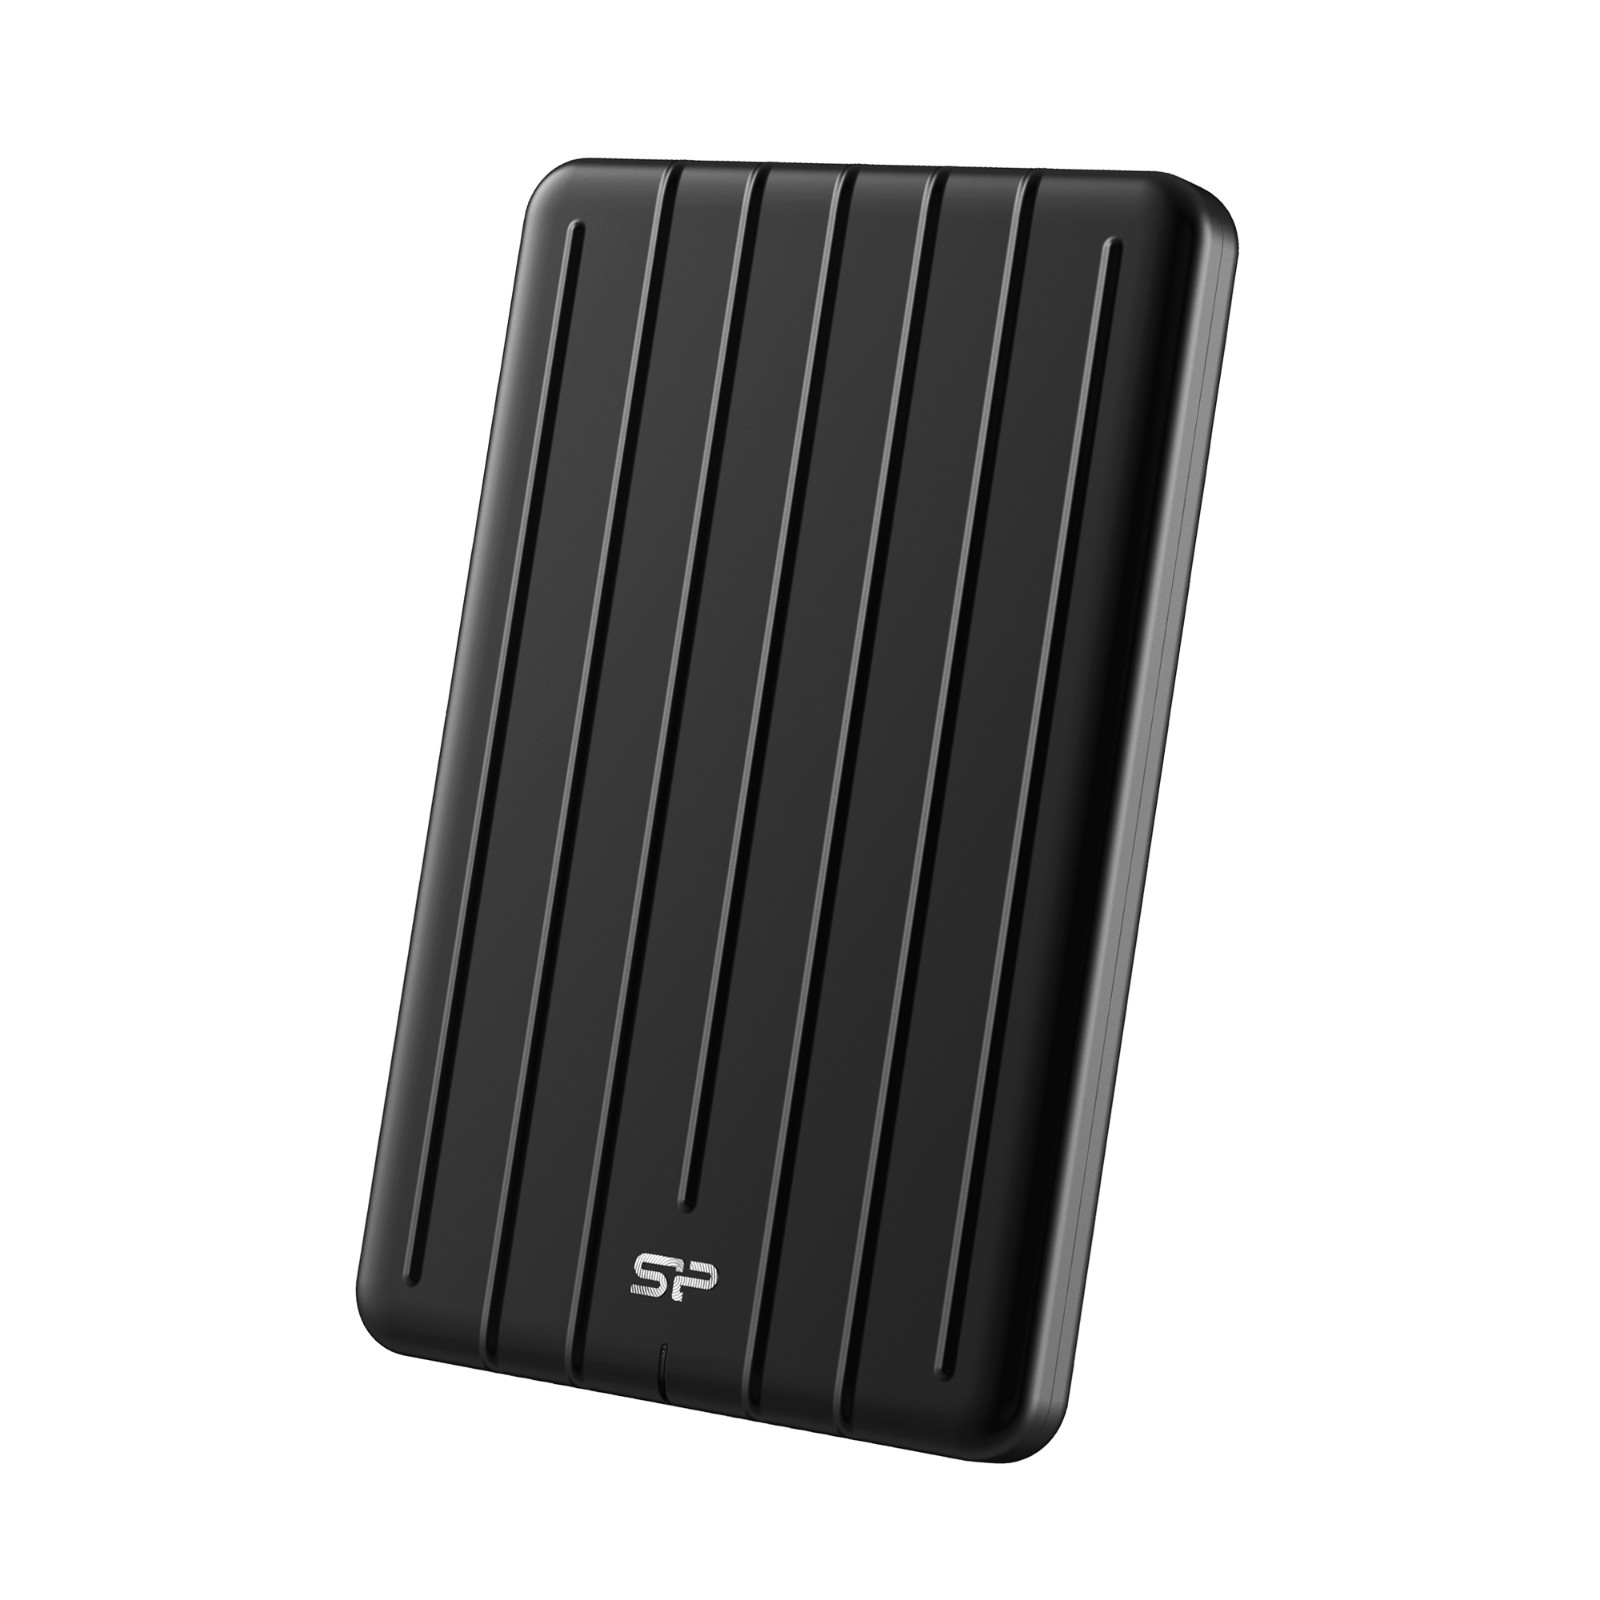 Silicon Power 1TB B75 Pro 520 MB/s USB C Scratch Resistant & Waterproof Portable External SSD with 2 cables